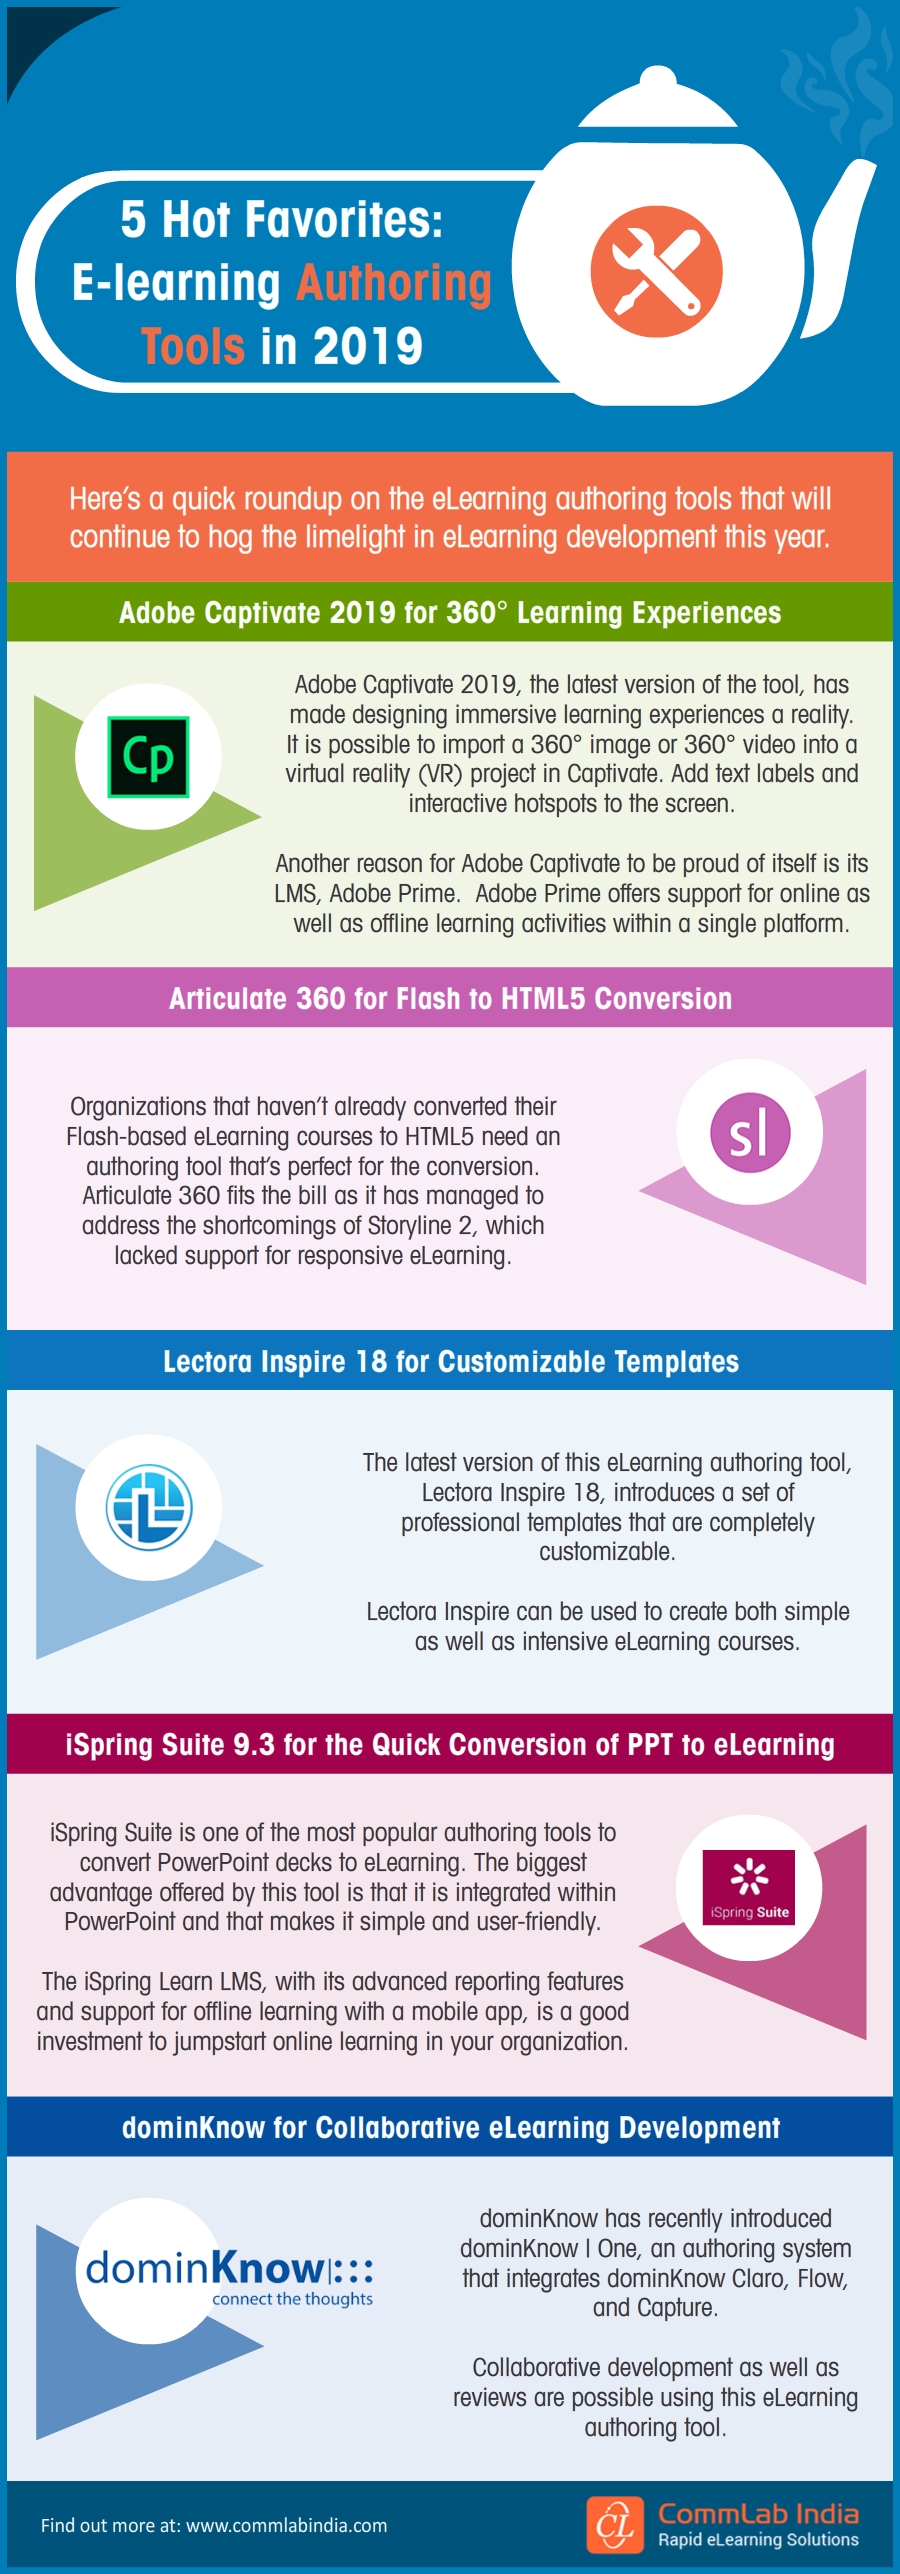 5 Hot Favorites: E-learning Authoring Tools in 2019 [Infographic]